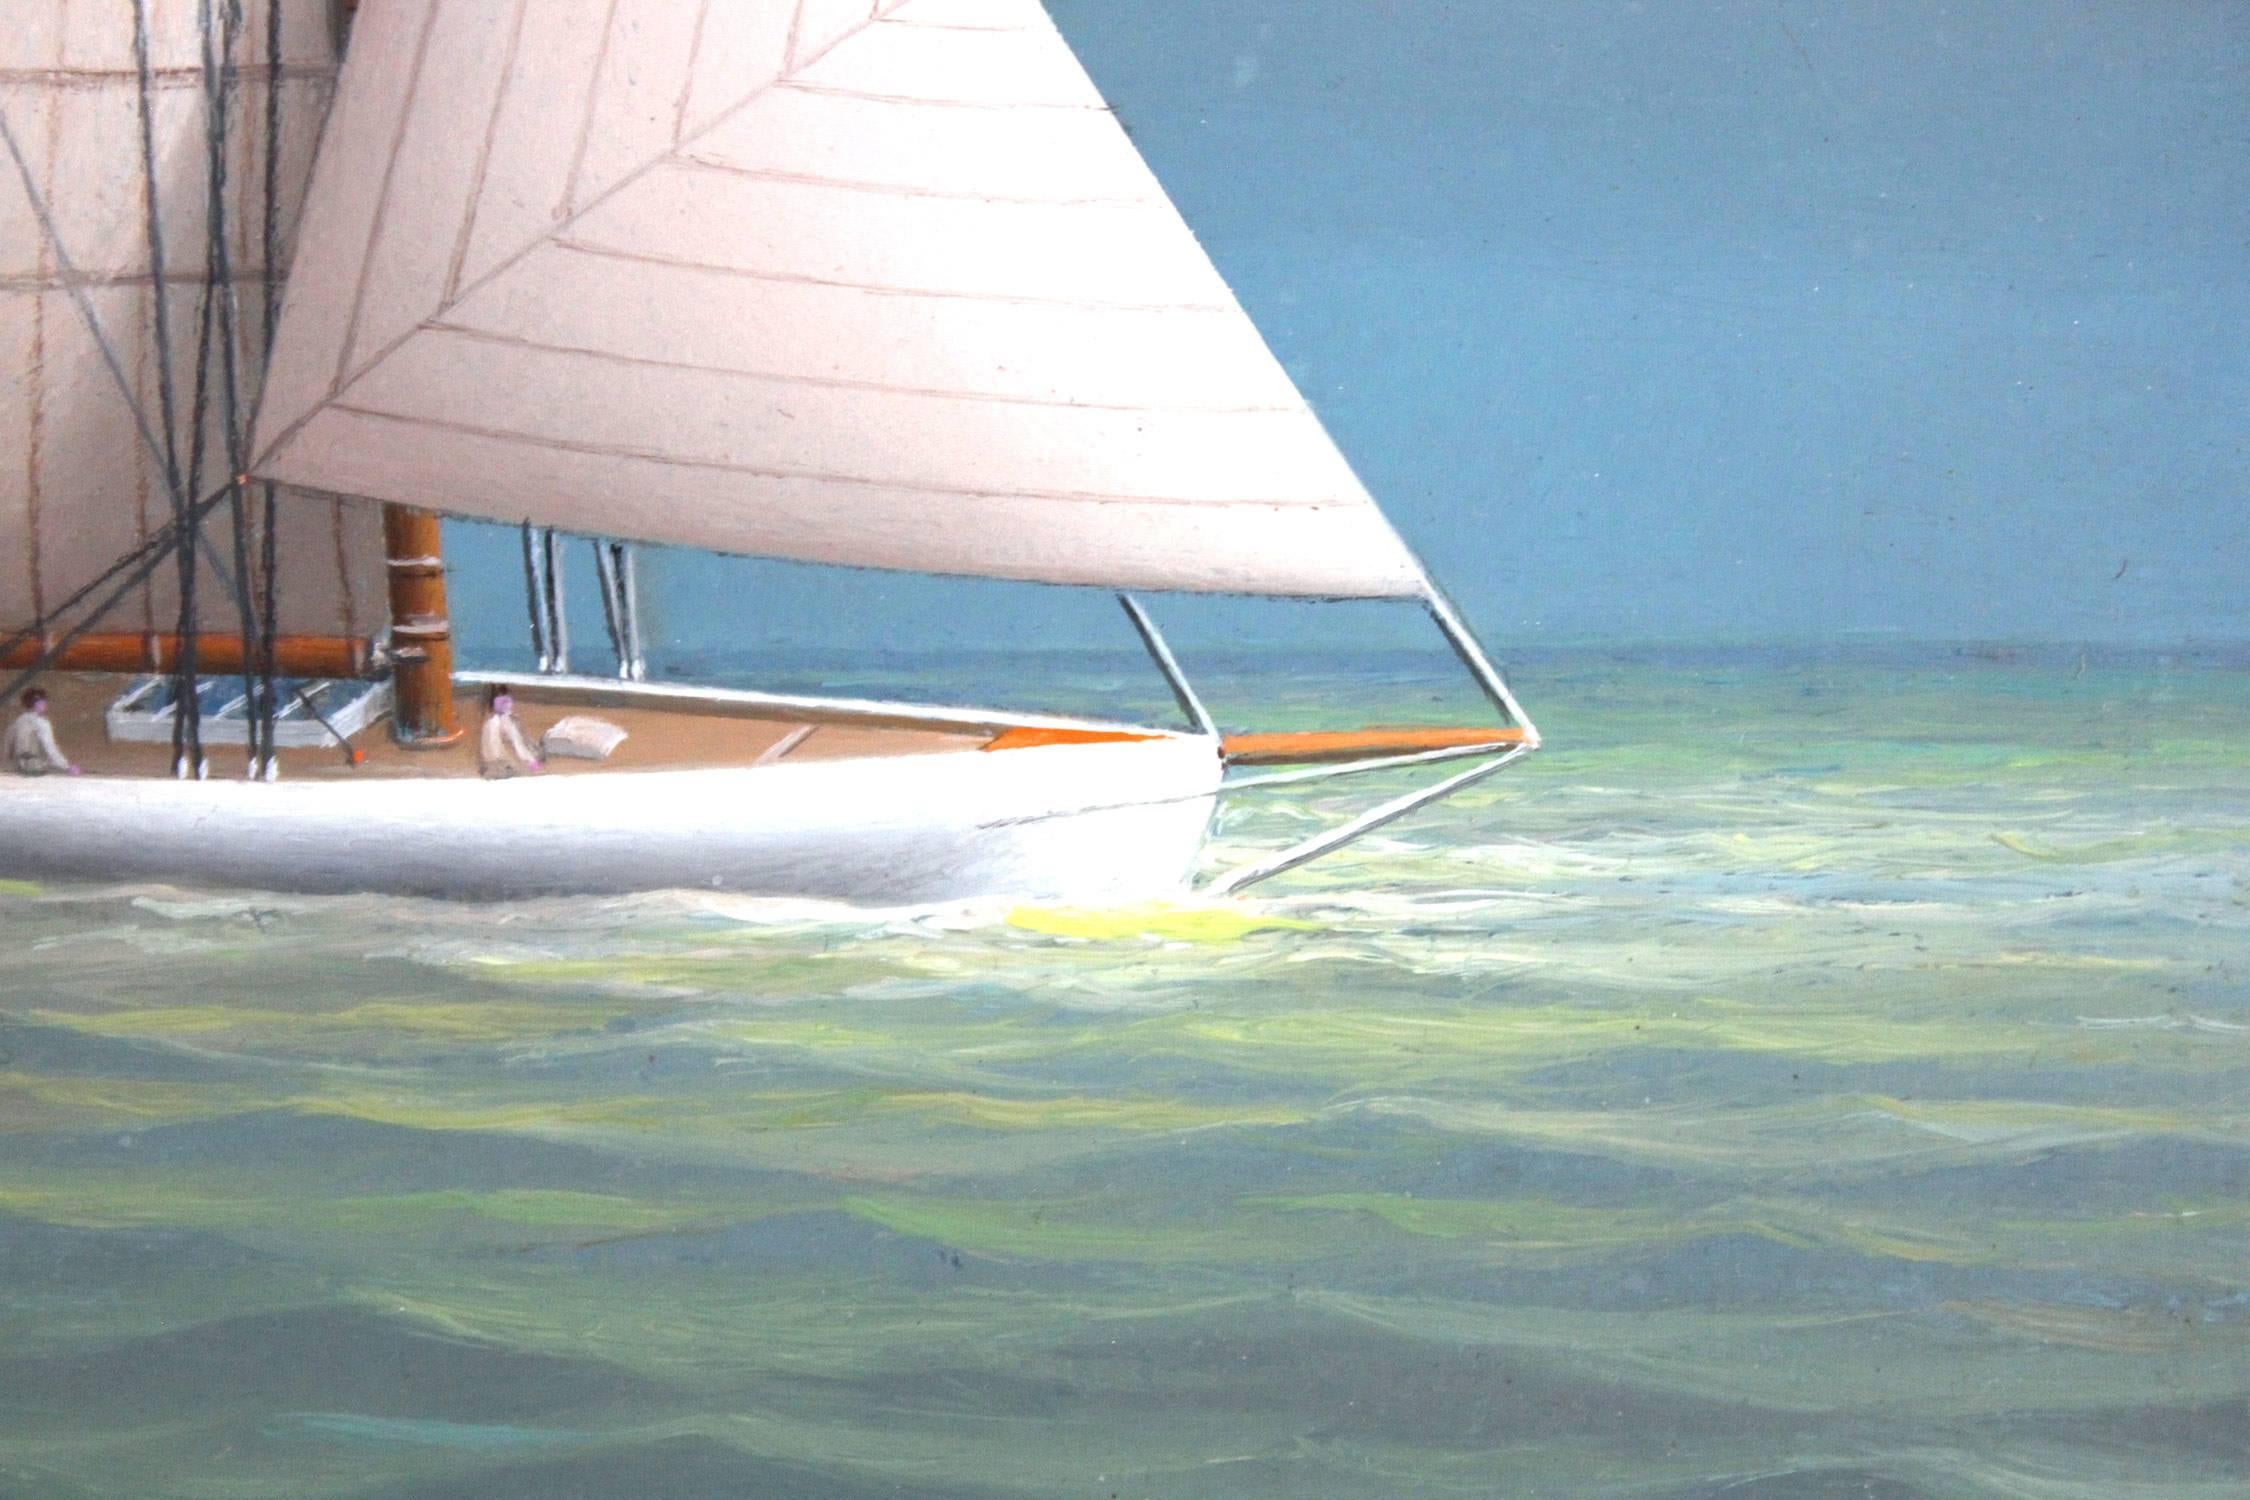 George Nemethy is known for his pastoral miniature sail boat oil paintings. In this piece, we can find a peaceful sailboat drifting on the sea. His dreamy puffed clouds that are so effortlessly contrasted with the majestic blues in his sky and